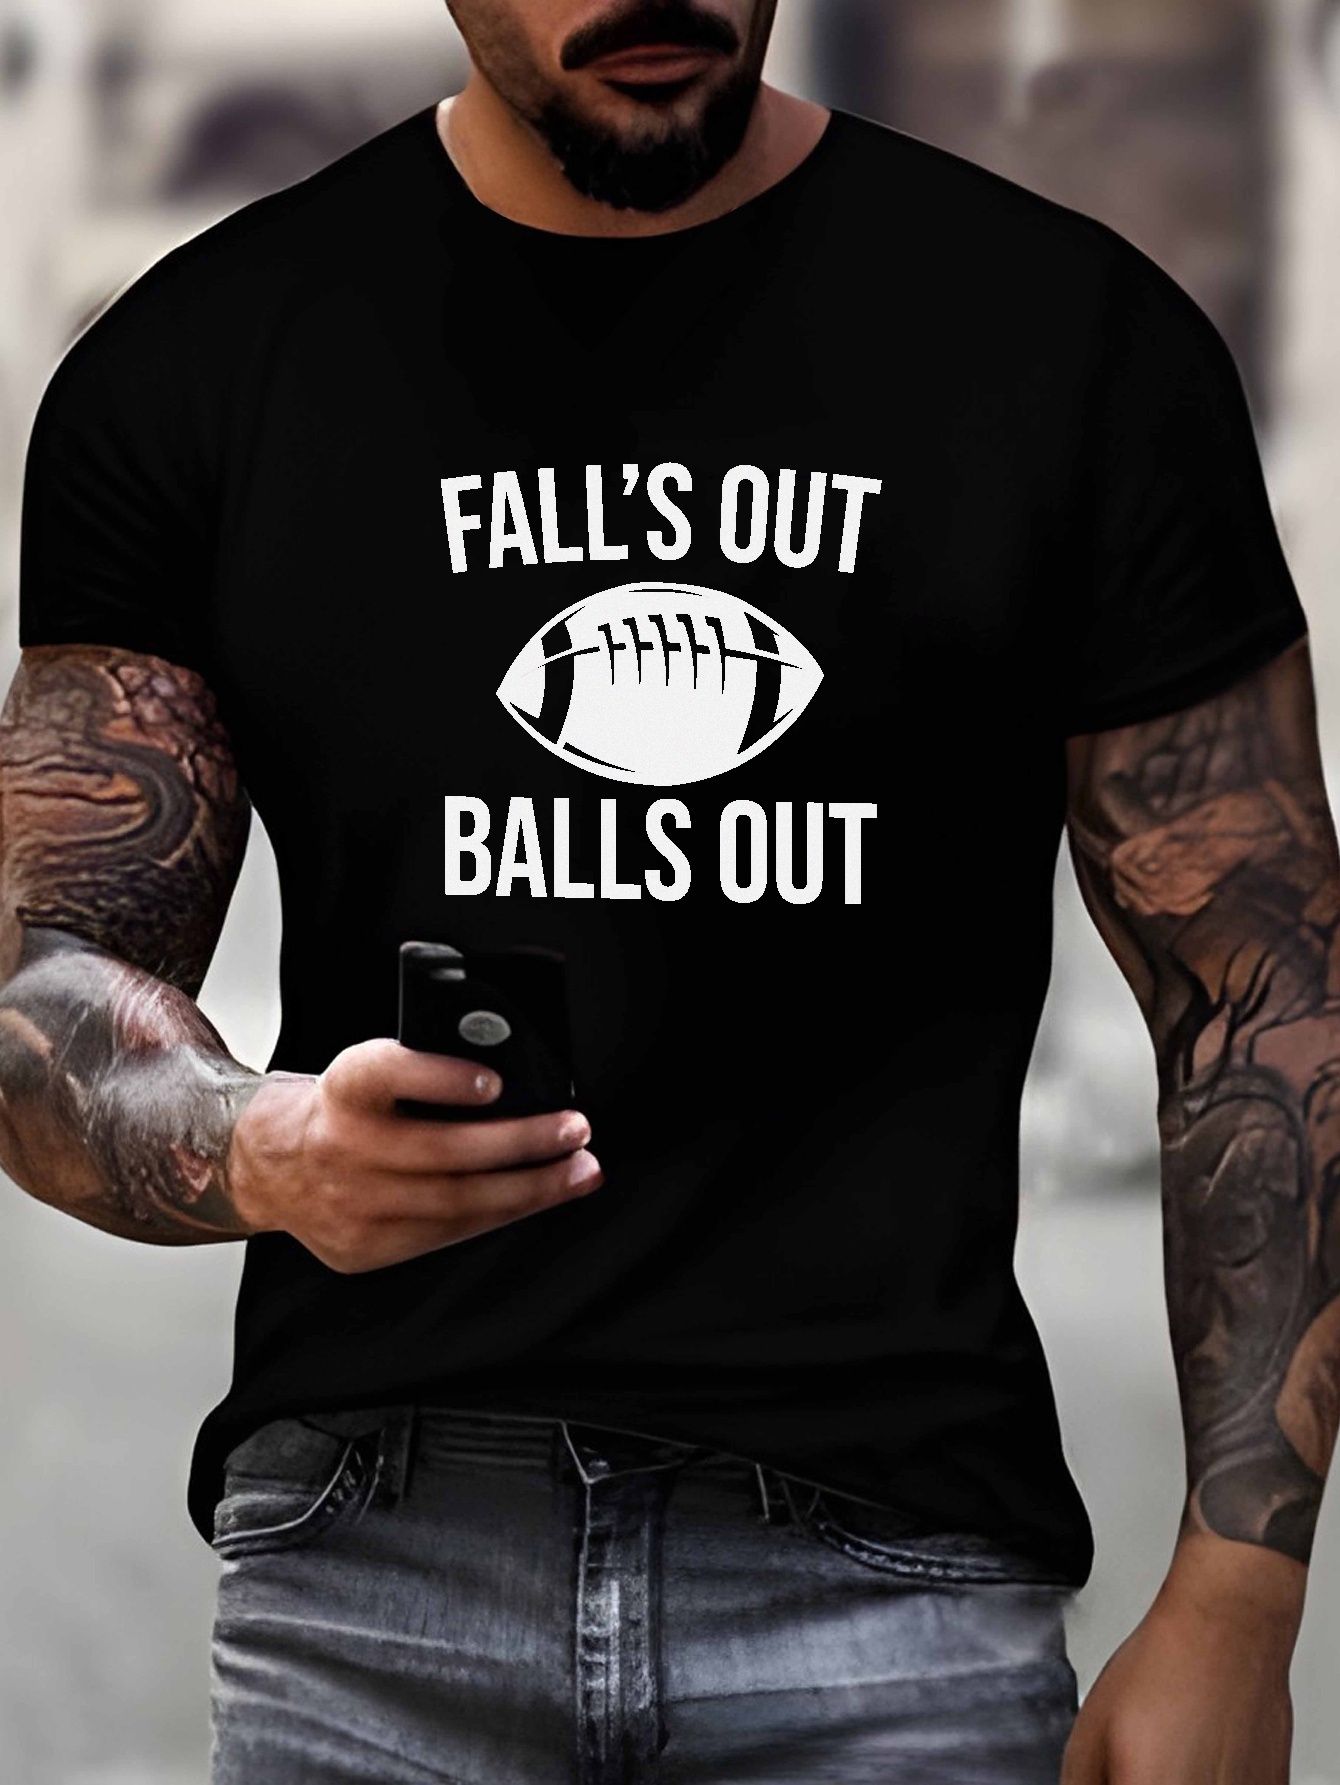 Oversized T Shirt For Men American Football Falls Out Balls Out Graphic  Print T Shirt Short Sleeve Tees Casual Fashion Tops For Summer Mens Clothing  Plus Size